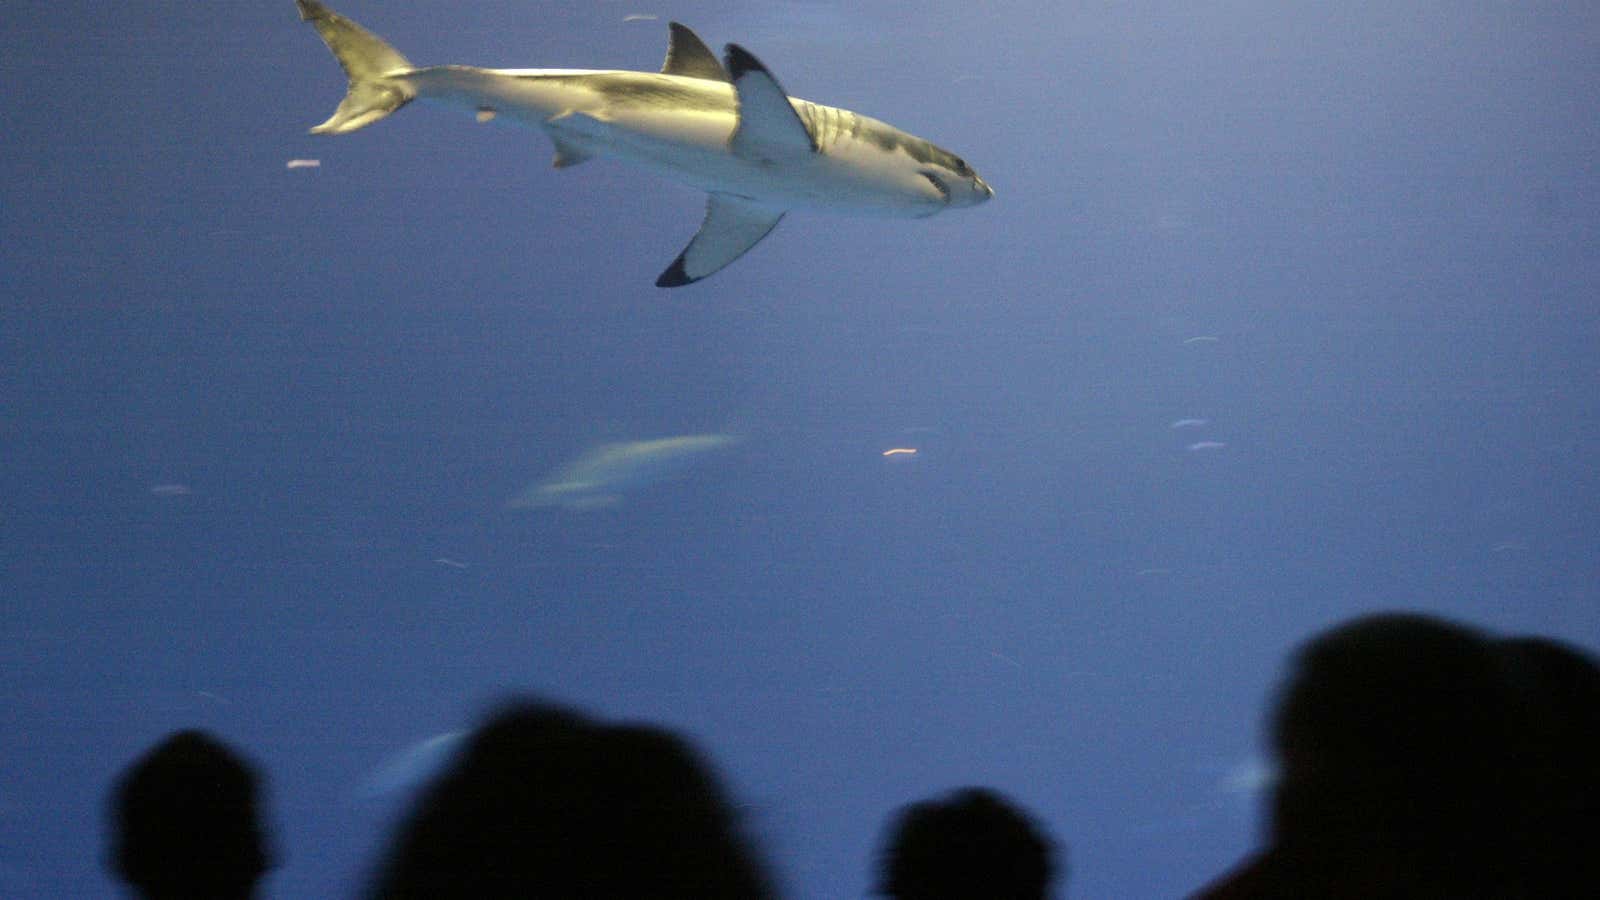 In 2004, the Monterey Bay Aquarium successfully kept a great white shark in captivity for more than 16 days.